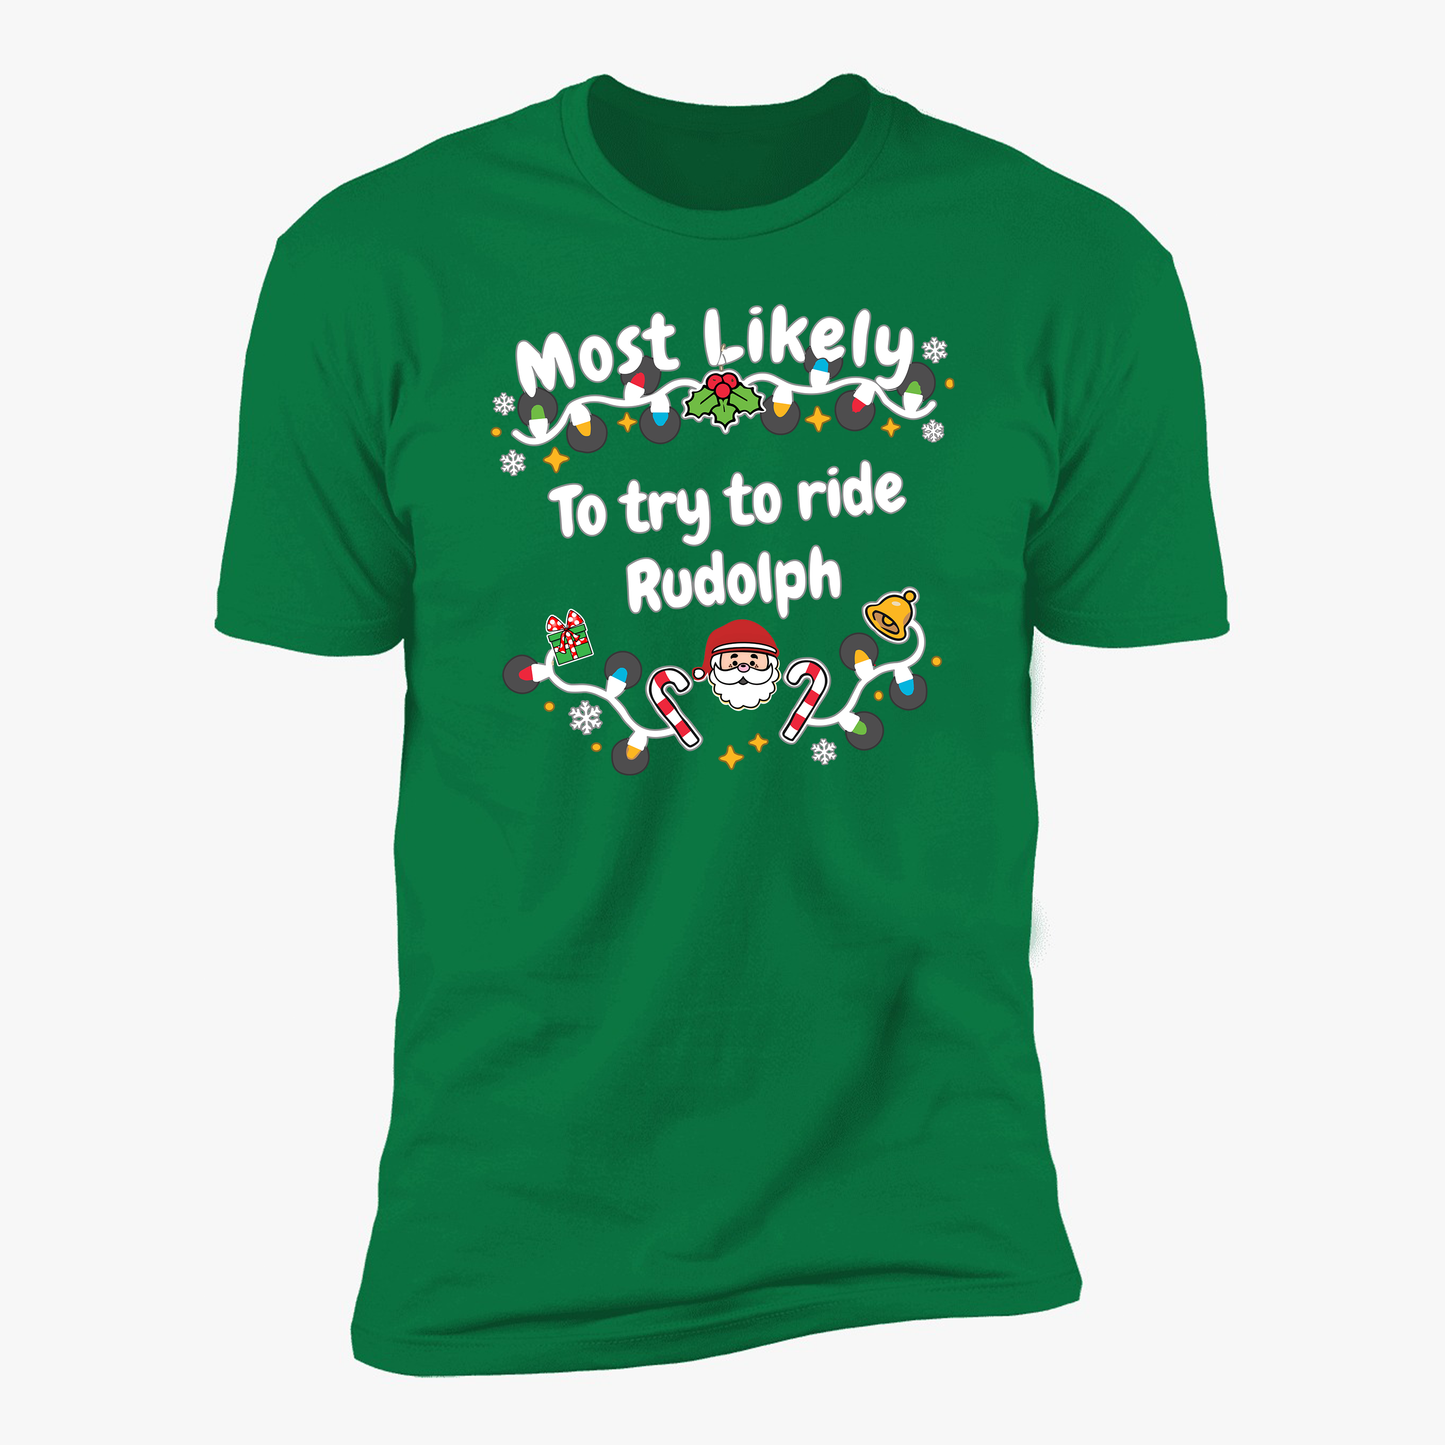 'Most Likely To try To Ride Rudolph & Rudolph Deluxe Unisex Tees'